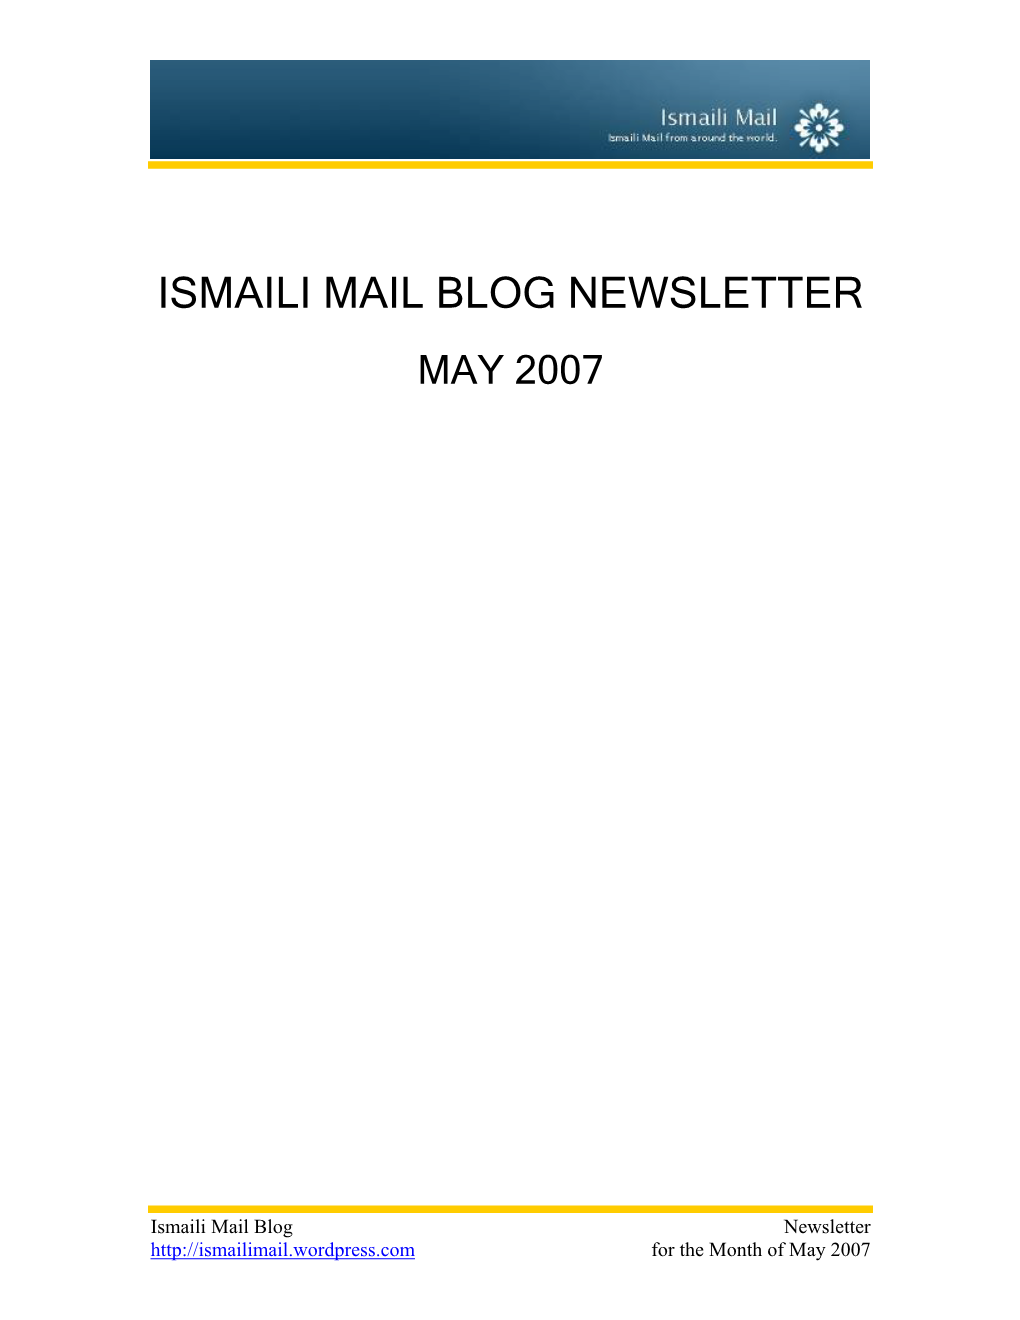 Ismaili Mail Blog Newsletter May 2007